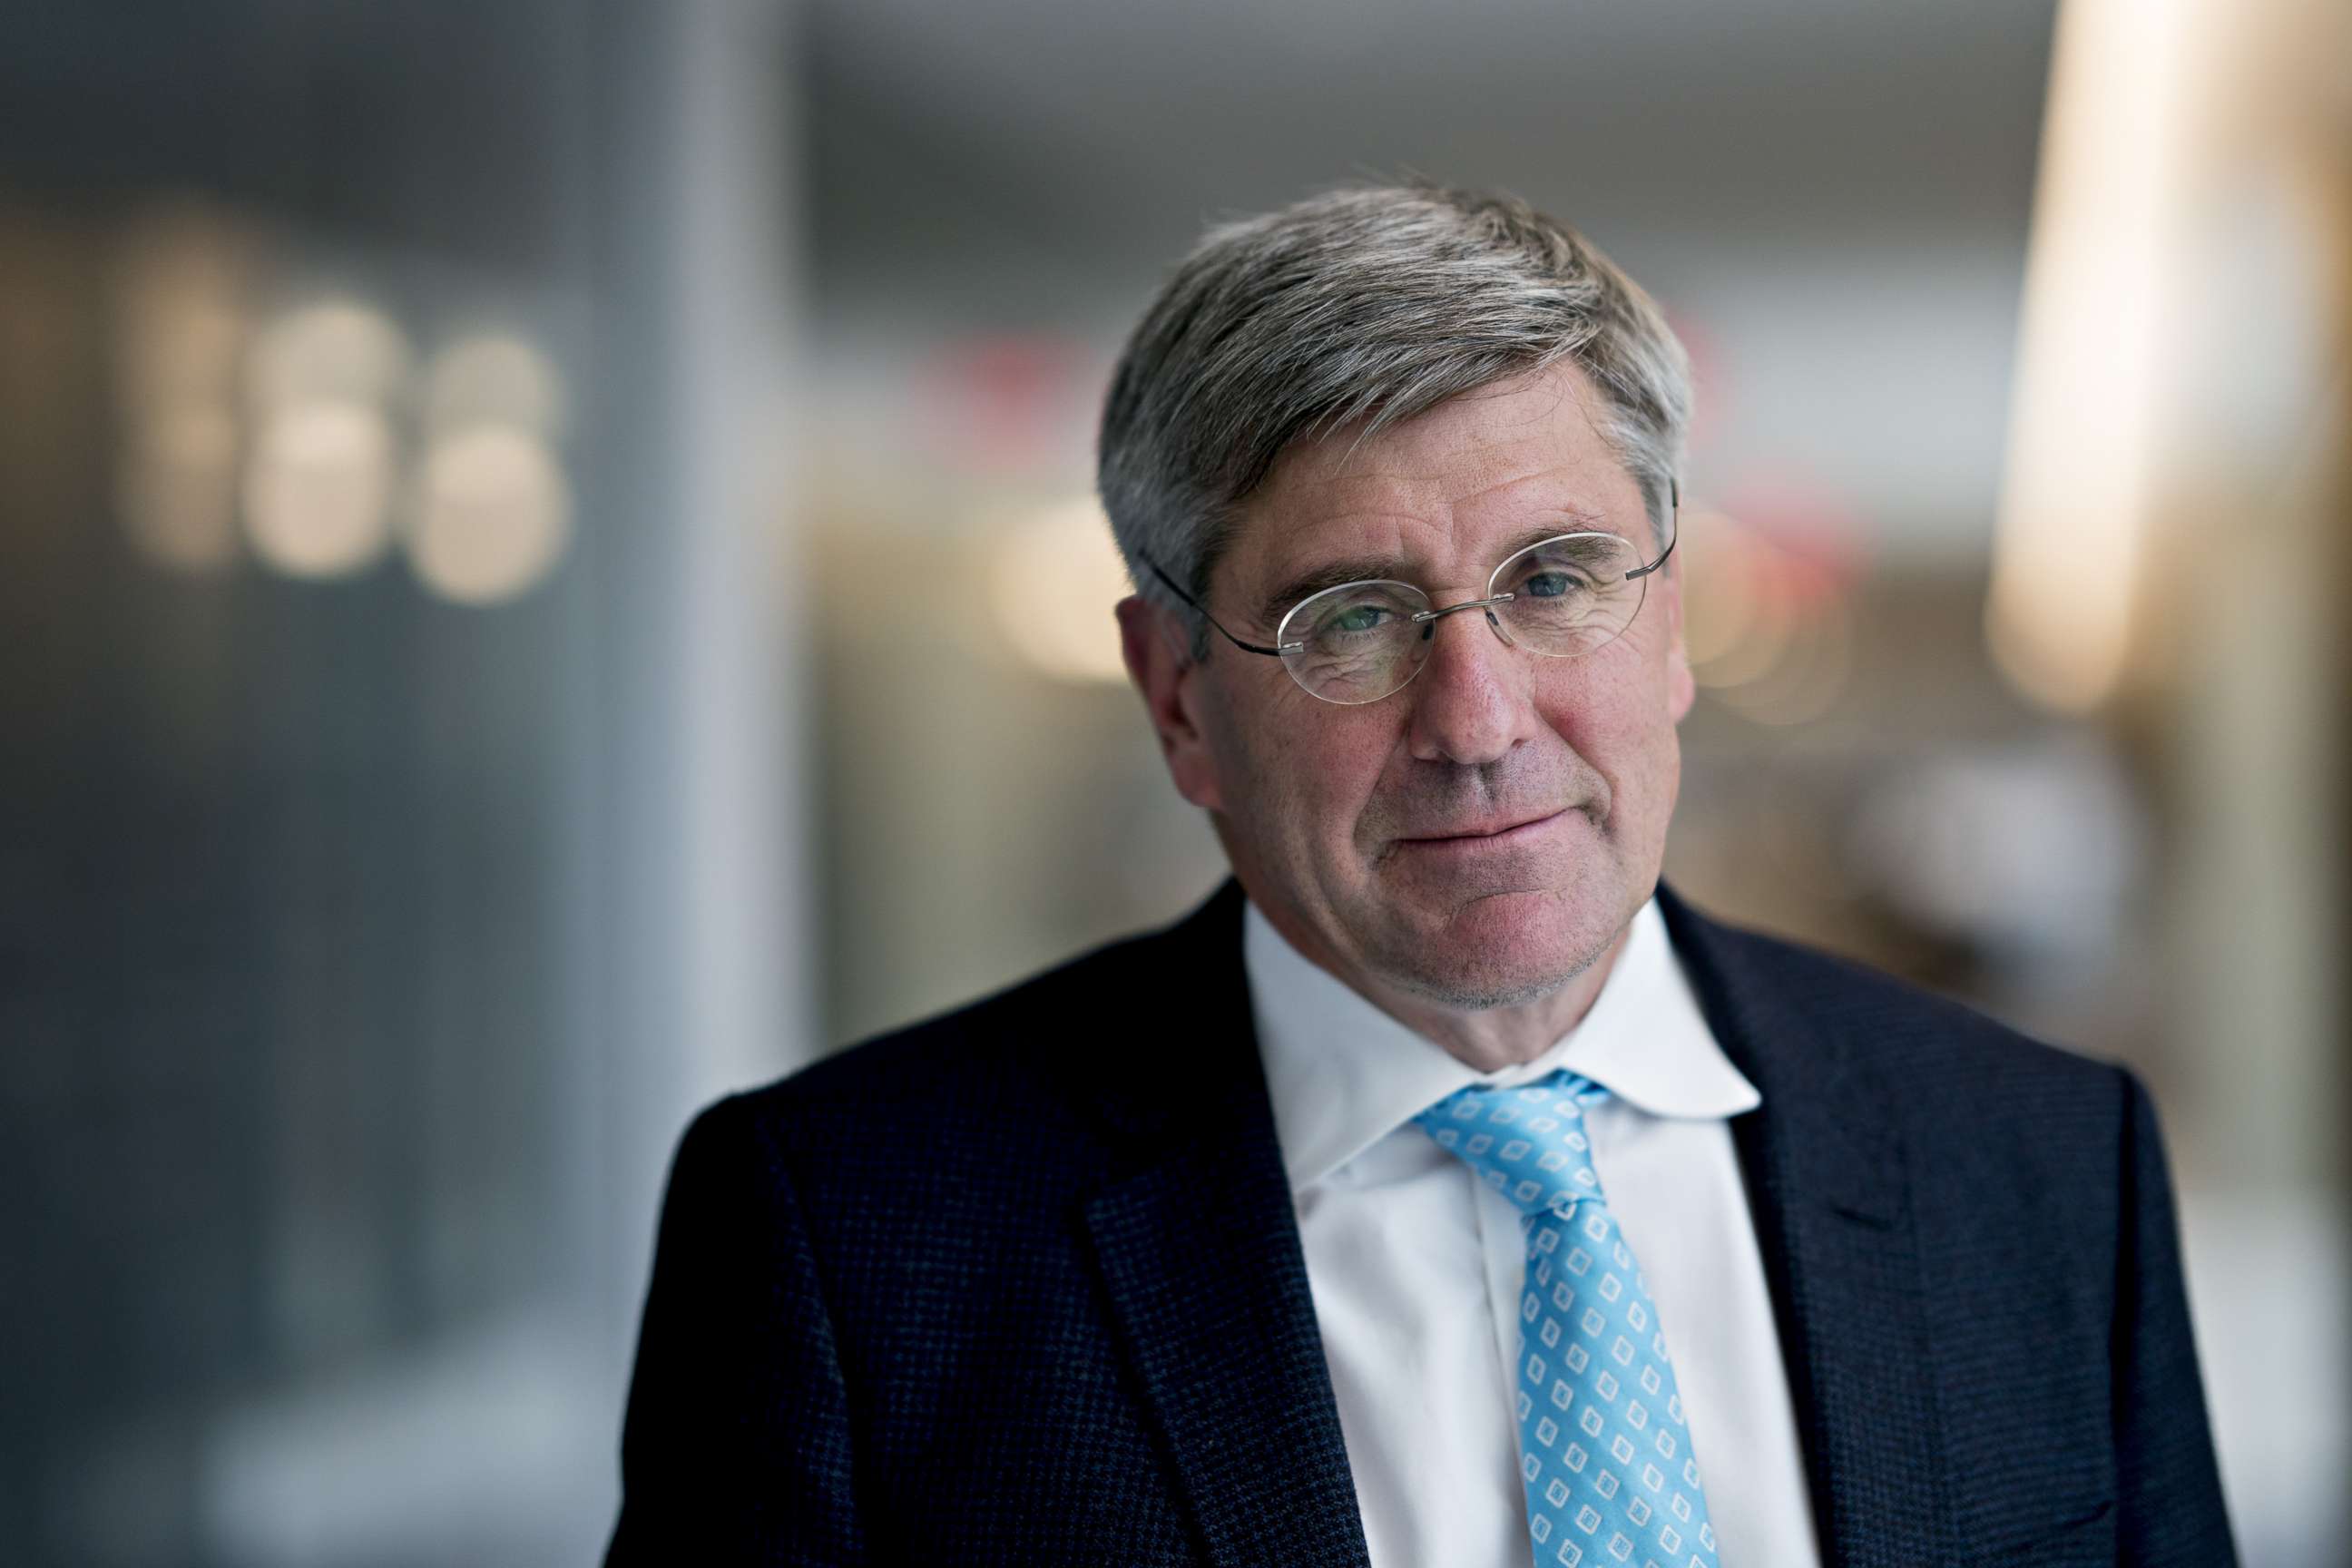 PHOTO: Stephen Moore, visiting fellow at the Heritage Foundation, stands for a photograph following a Bloomberg Television interview in Washington, D.C., March 22, 2019.  